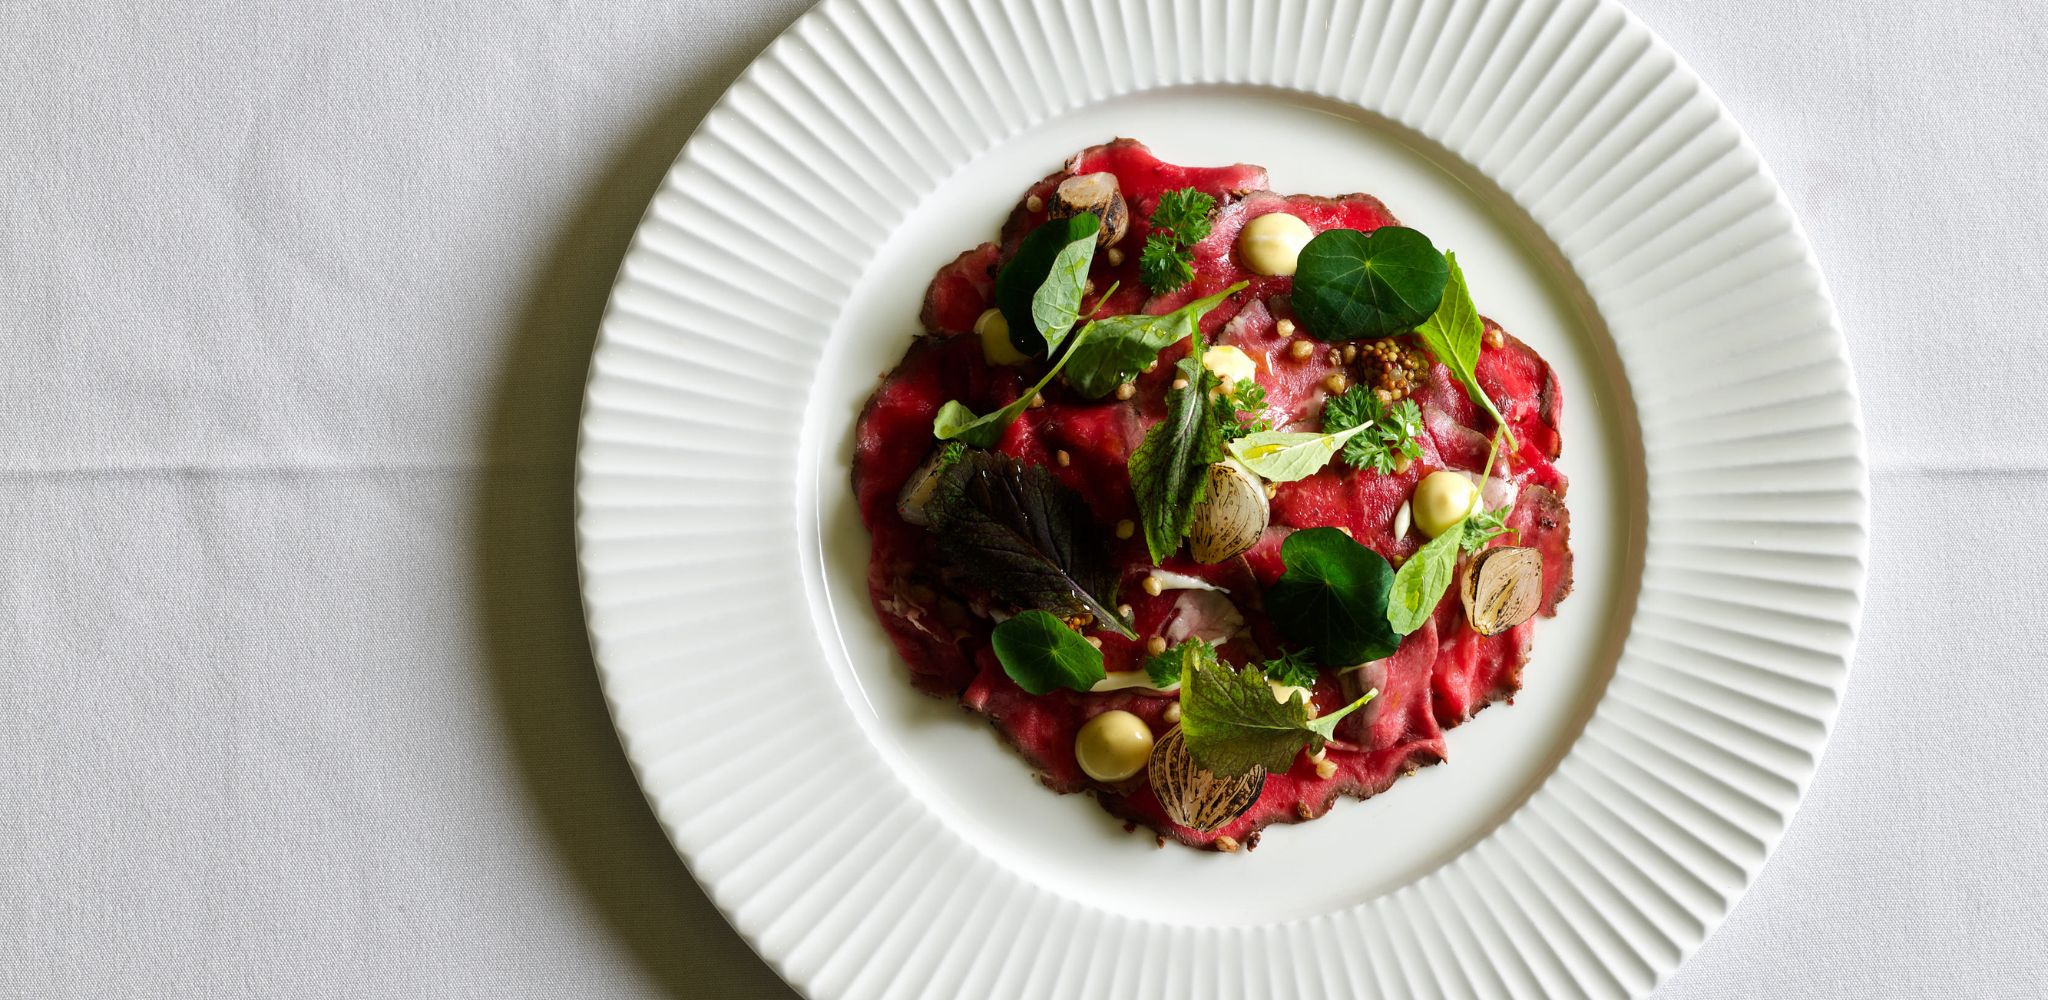 Image of Westholme dry aged Wagyu beef carpaccio on a white plate with a white table cloth.